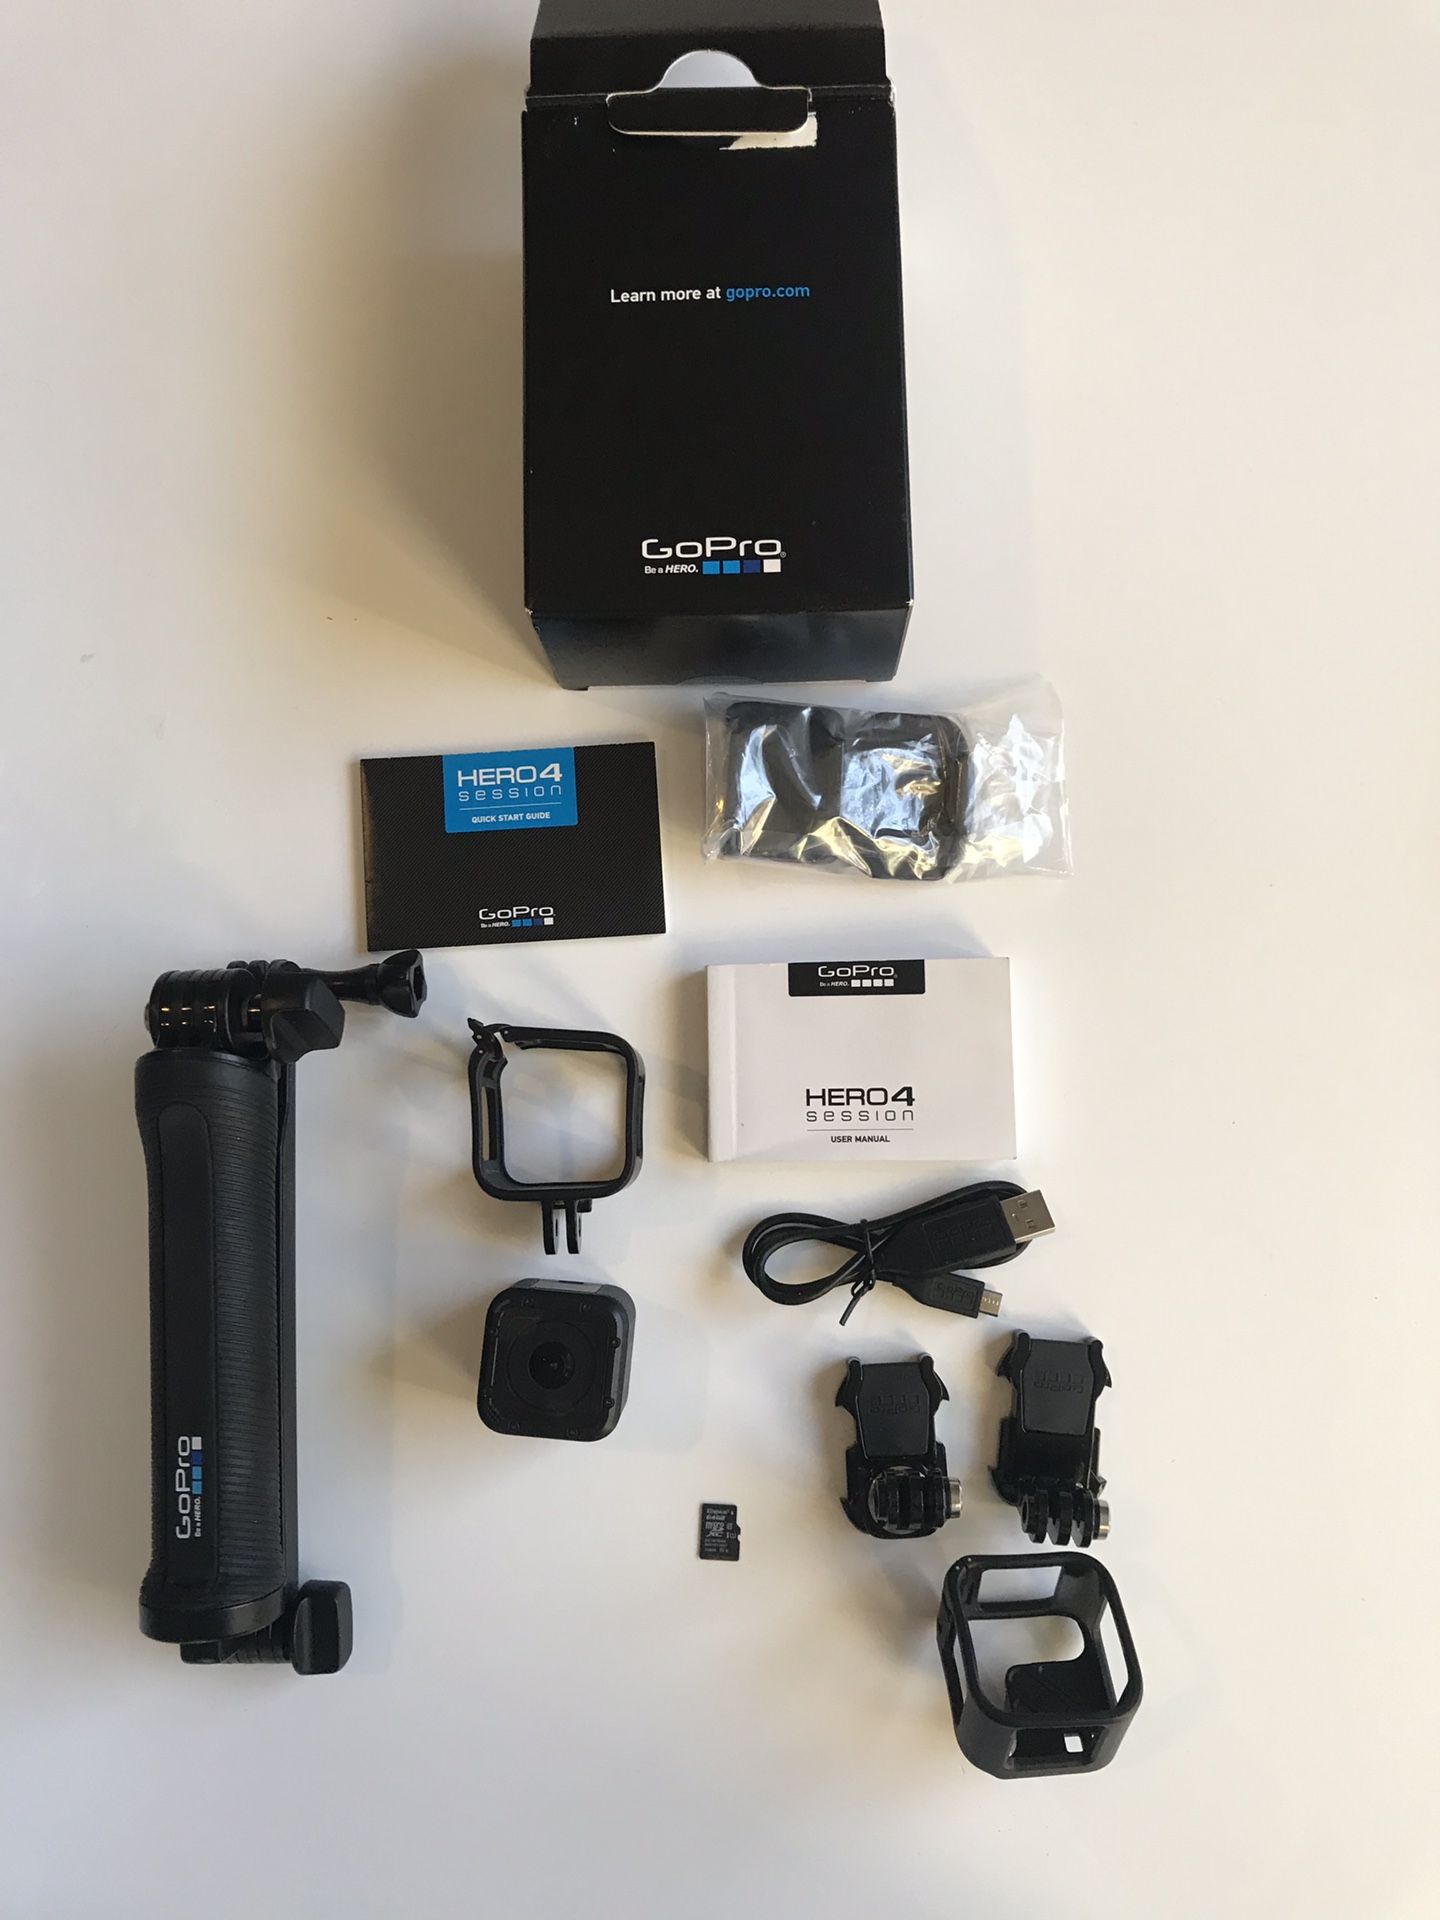 GoPro Hero 4 Session complete kit with stick and 64GB microSD memory